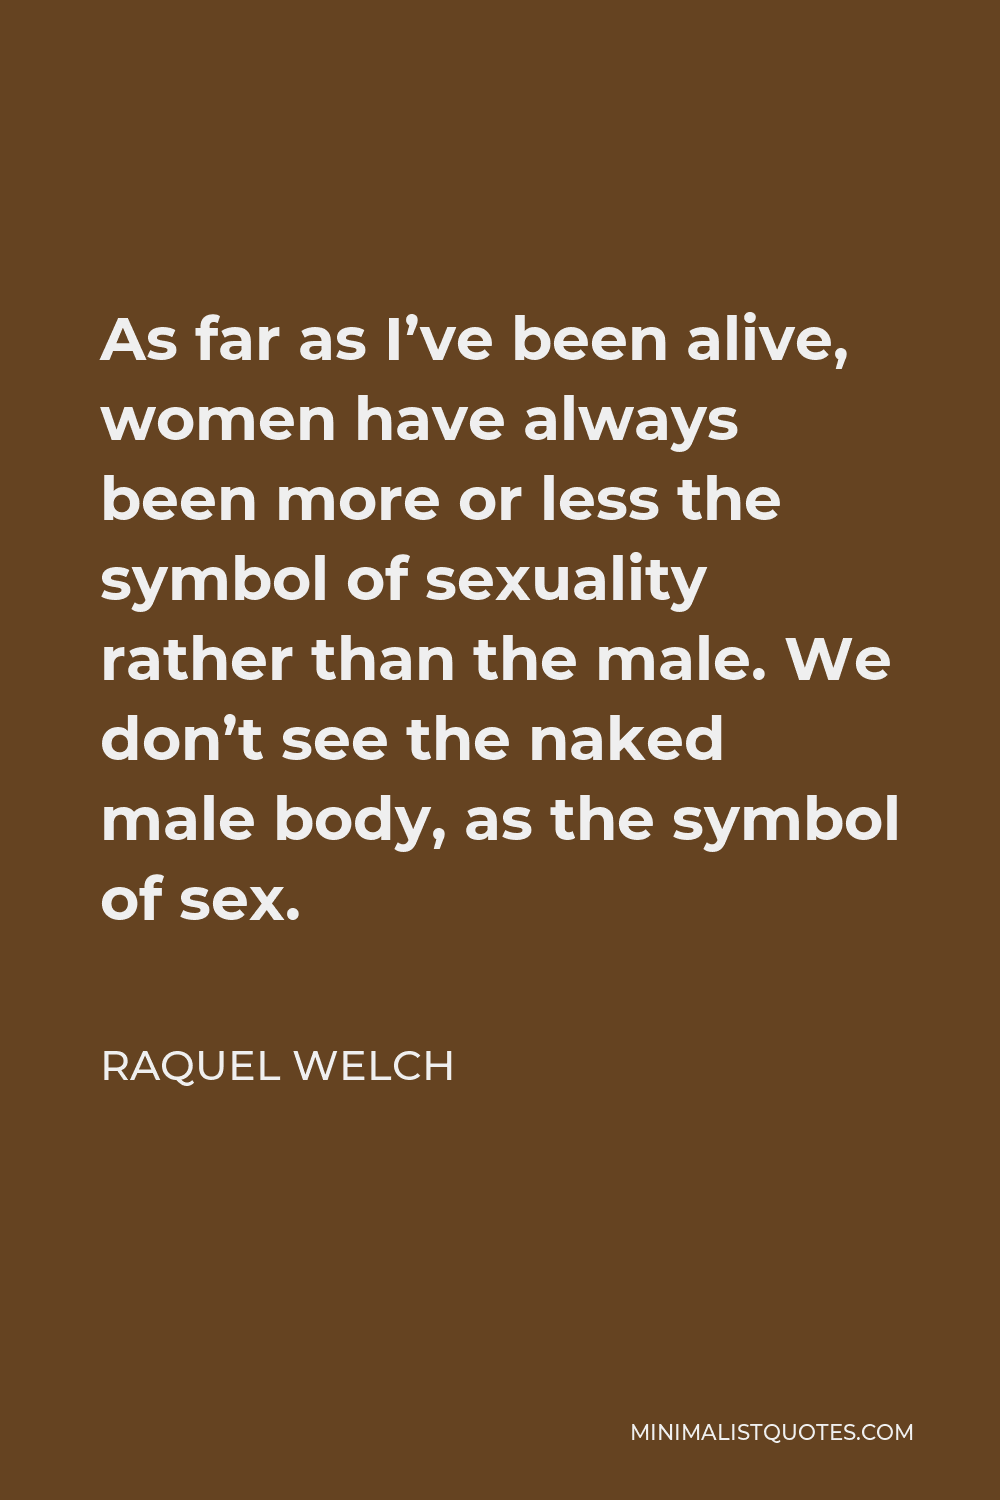 Raquel Welch Quote - As far as I’ve been alive, women have always been more or less the symbol of sexuality rather than the male. We don’t see the naked male body, as the symbol of sex.